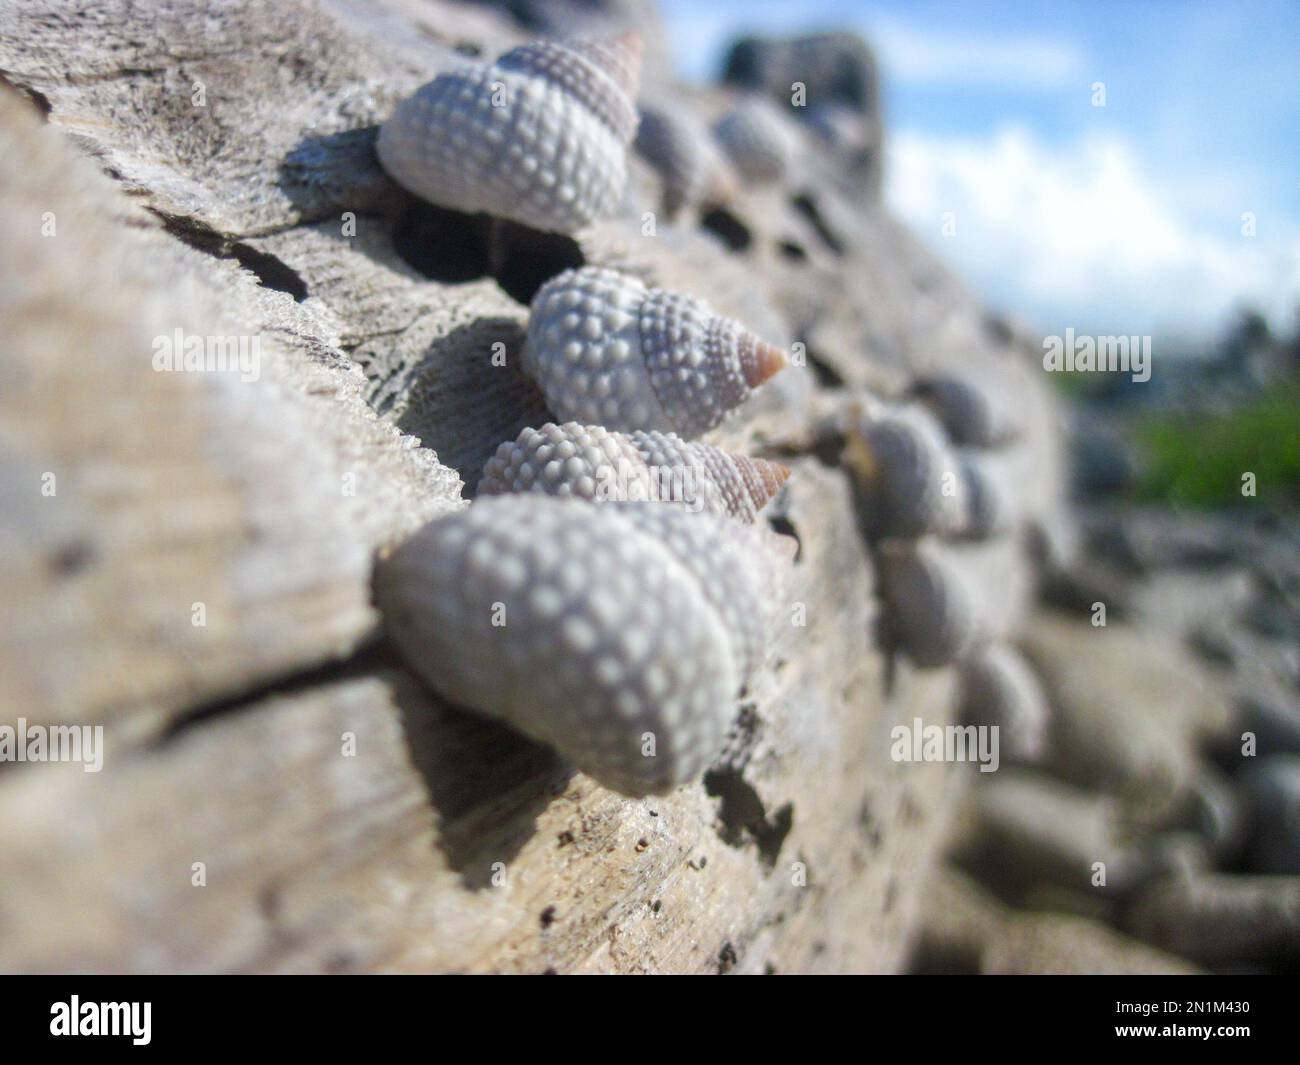 Close up of a group of sea snails attached to an old and dry trunk of a tree near the beach Stock Photo